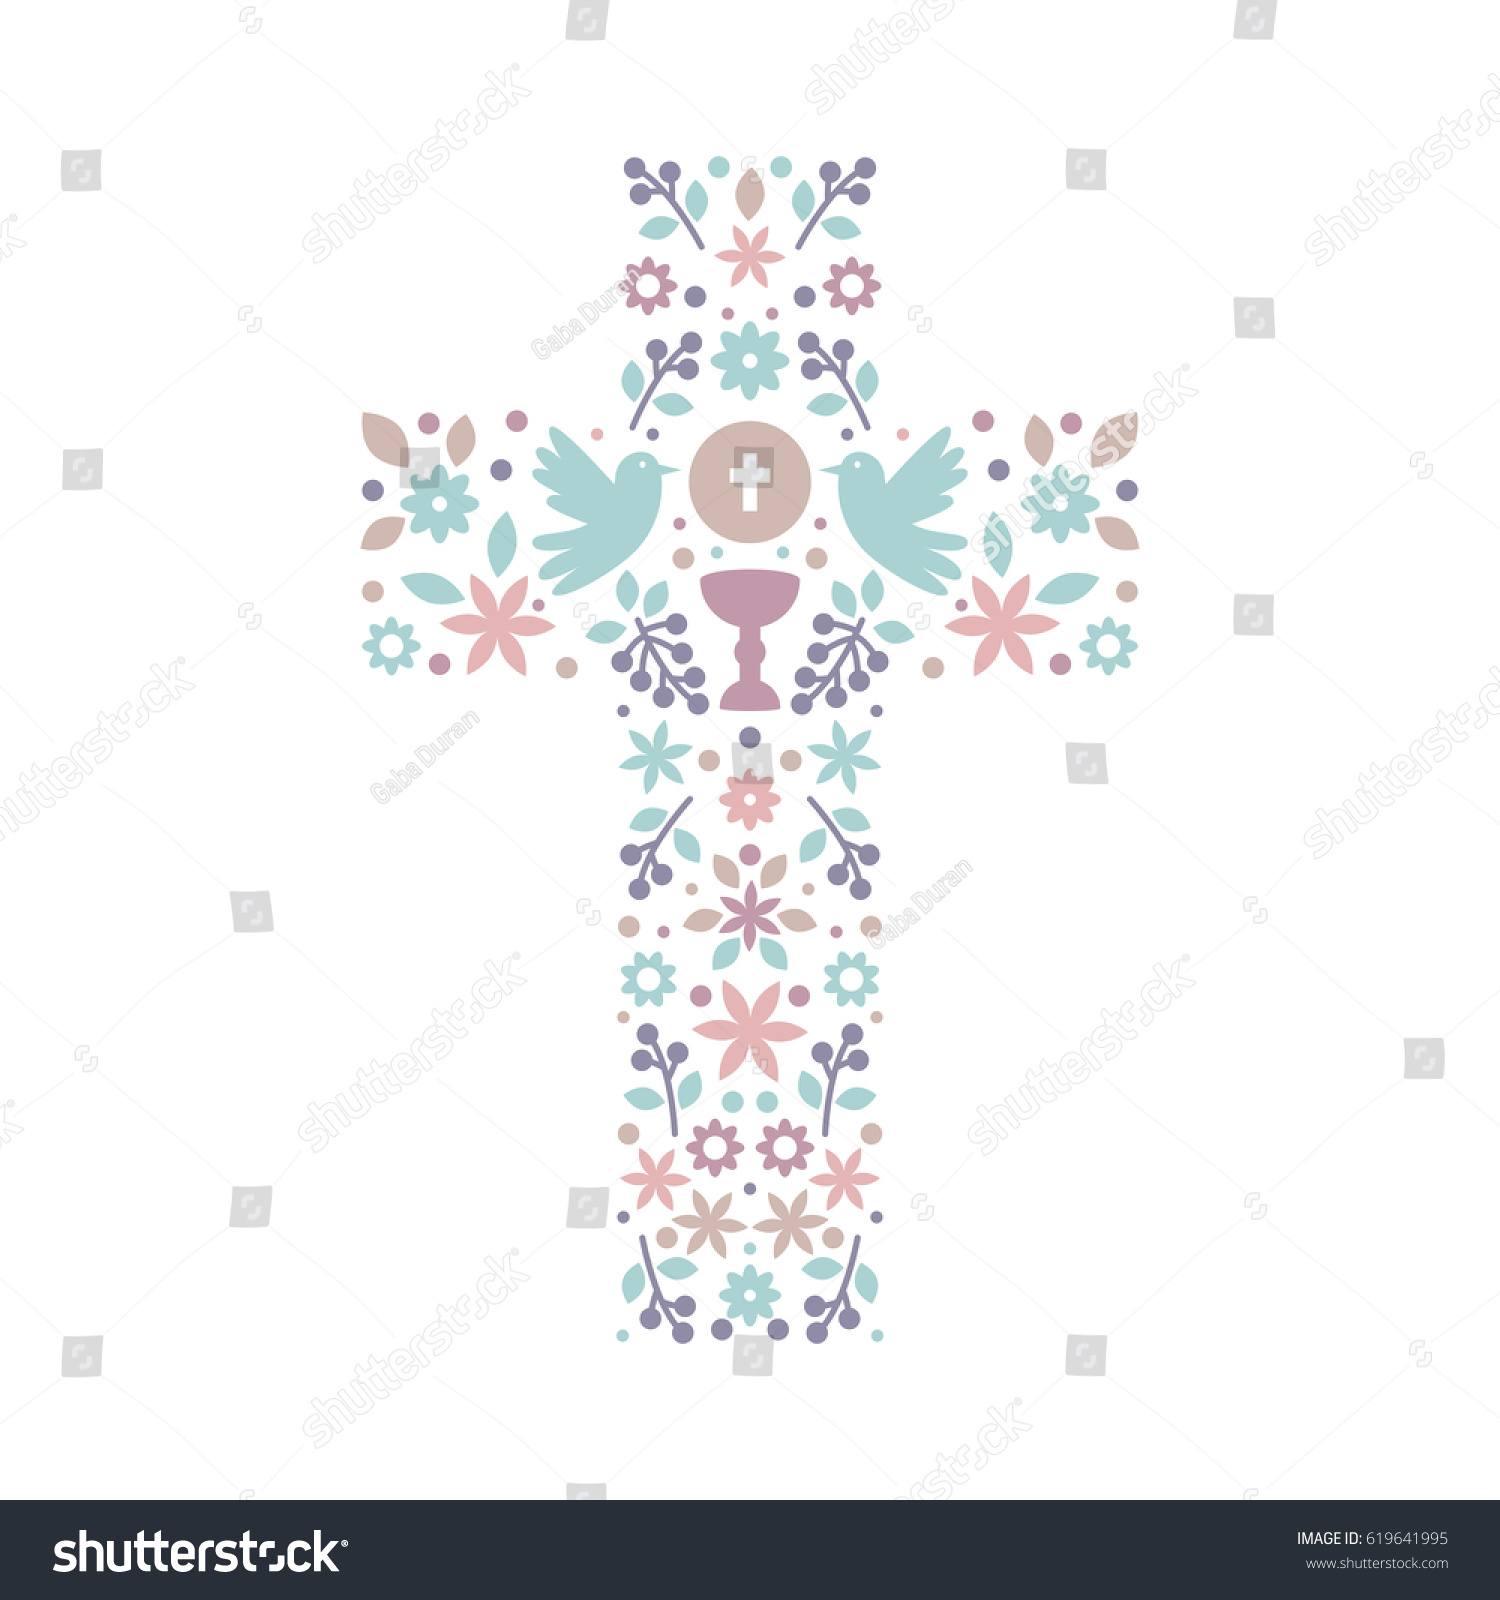 SVG of Catholic Christian Cross with natural elements inside, doves, chalice, grapes and flowers. First Communion cross svg